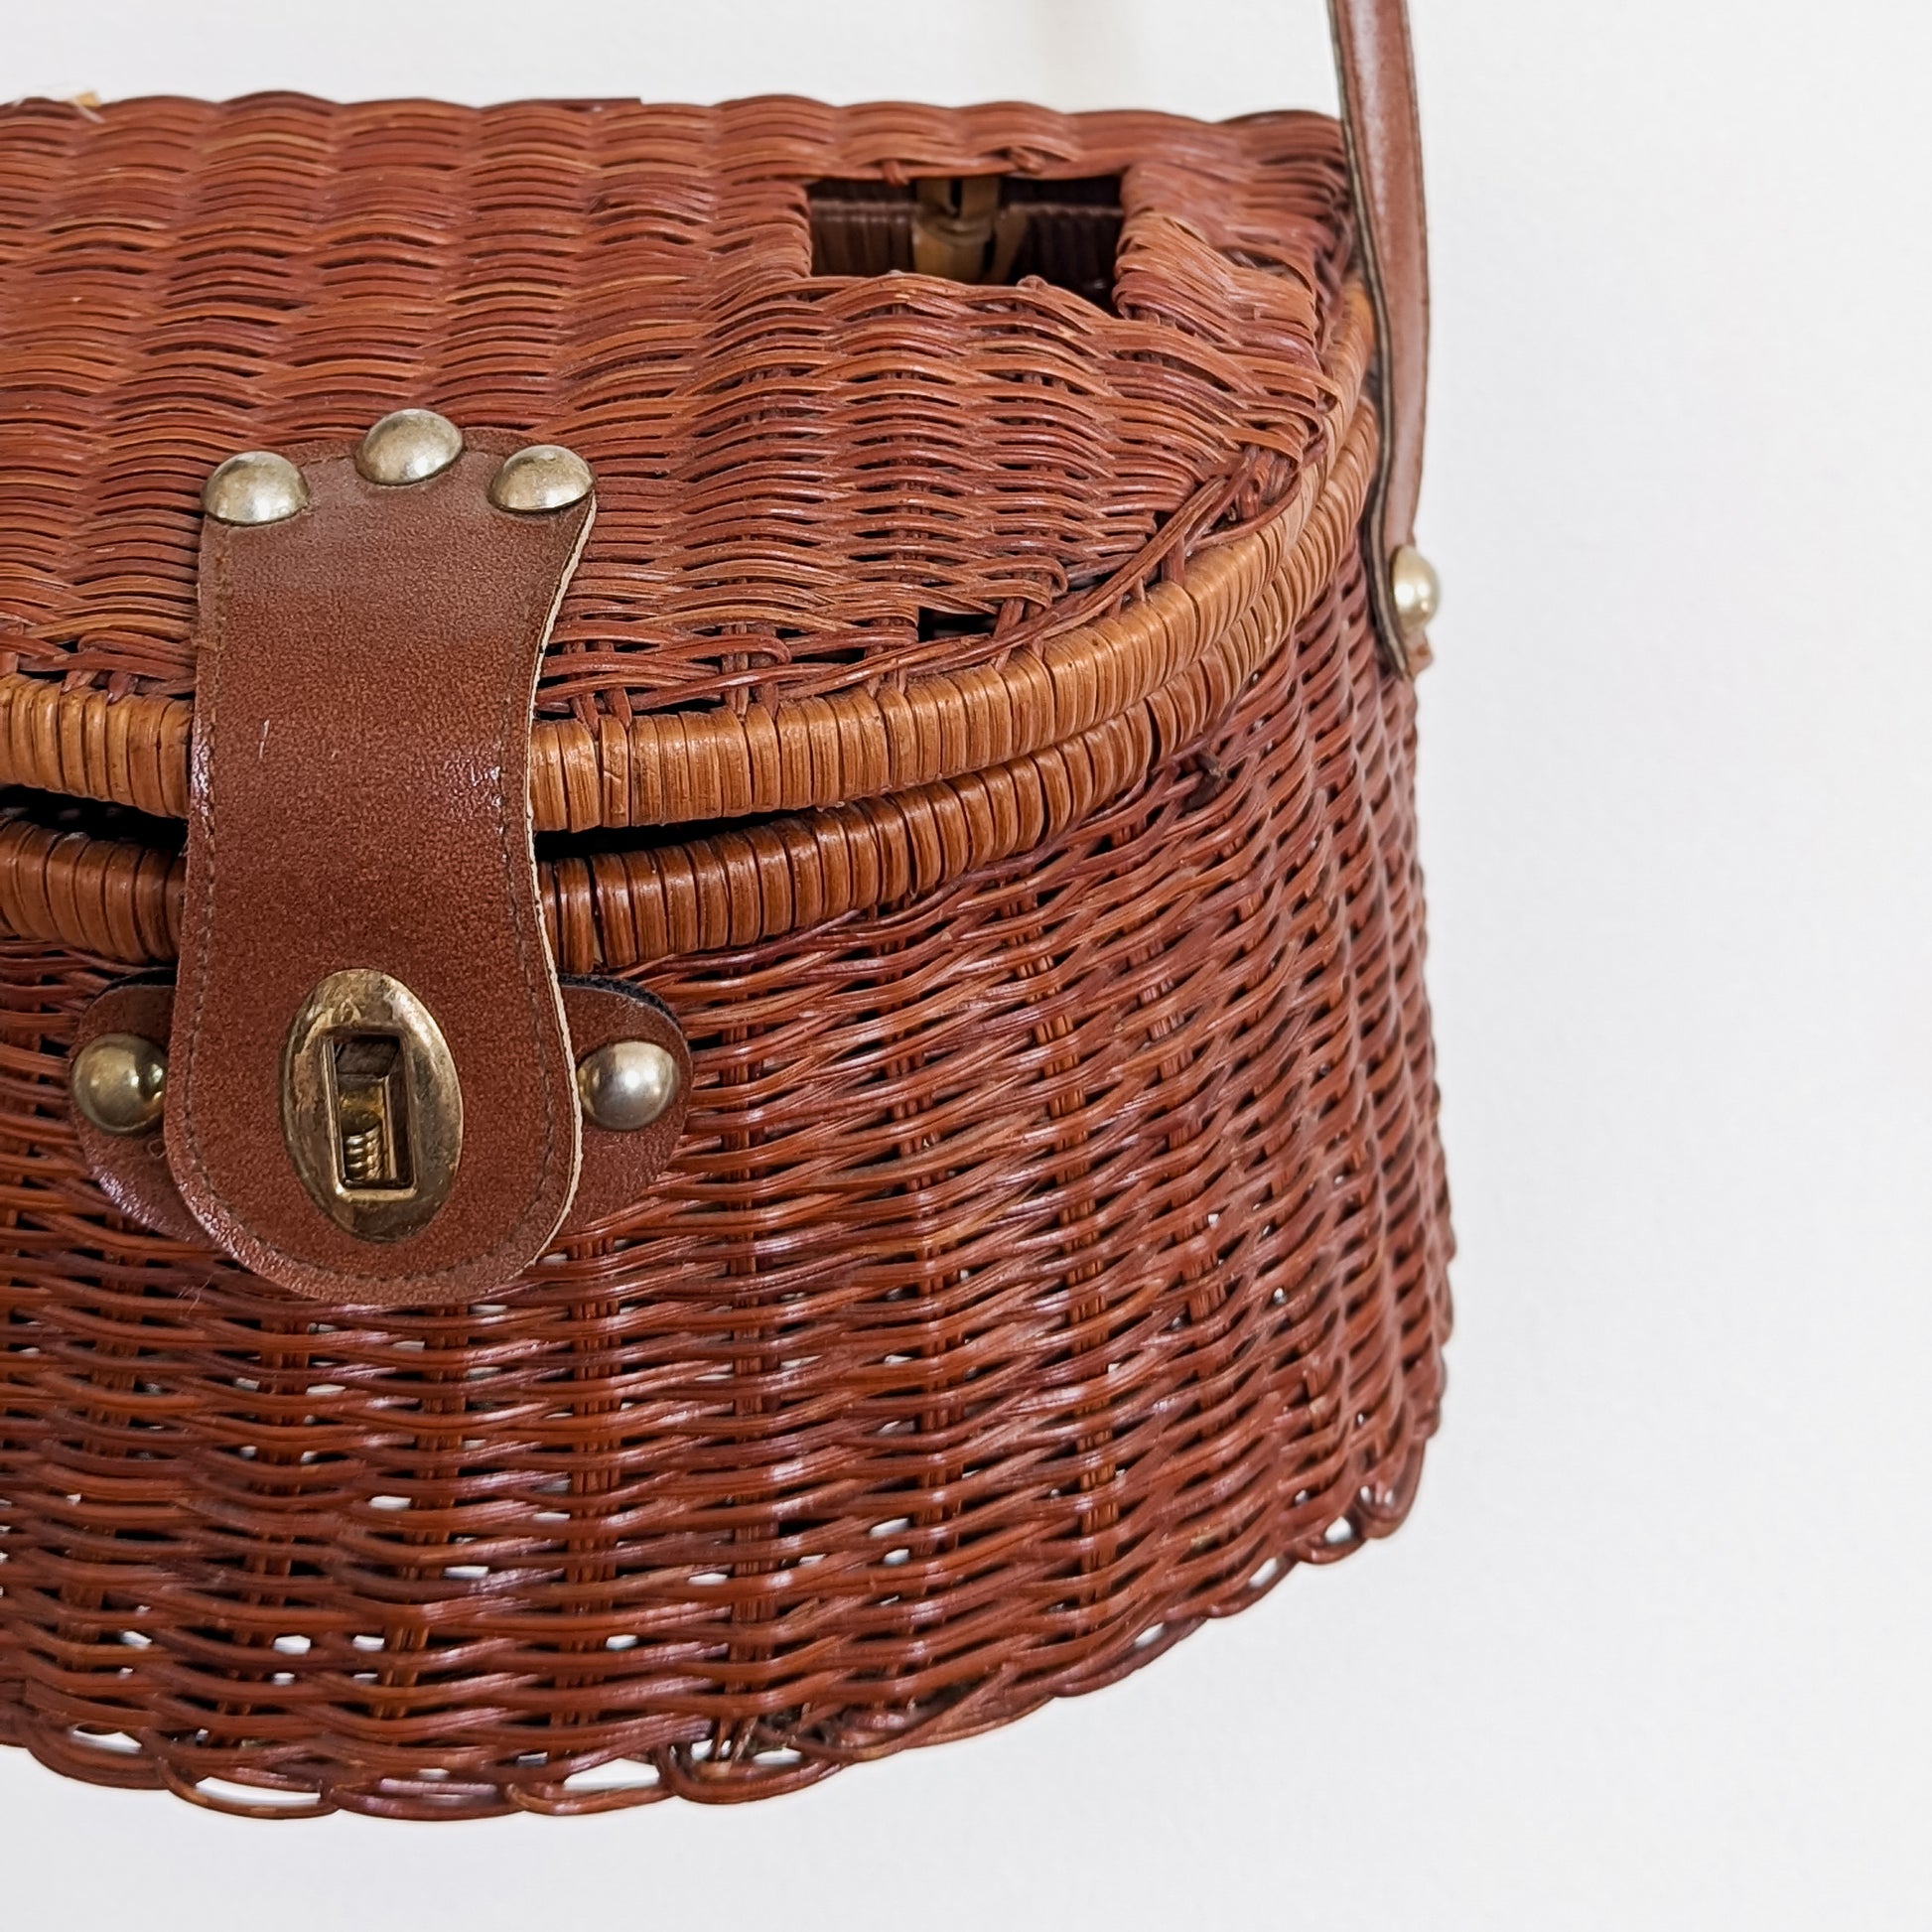 Woven Creel Basket / Foraging Basket with Leather Strap – 3 Chickadee Market